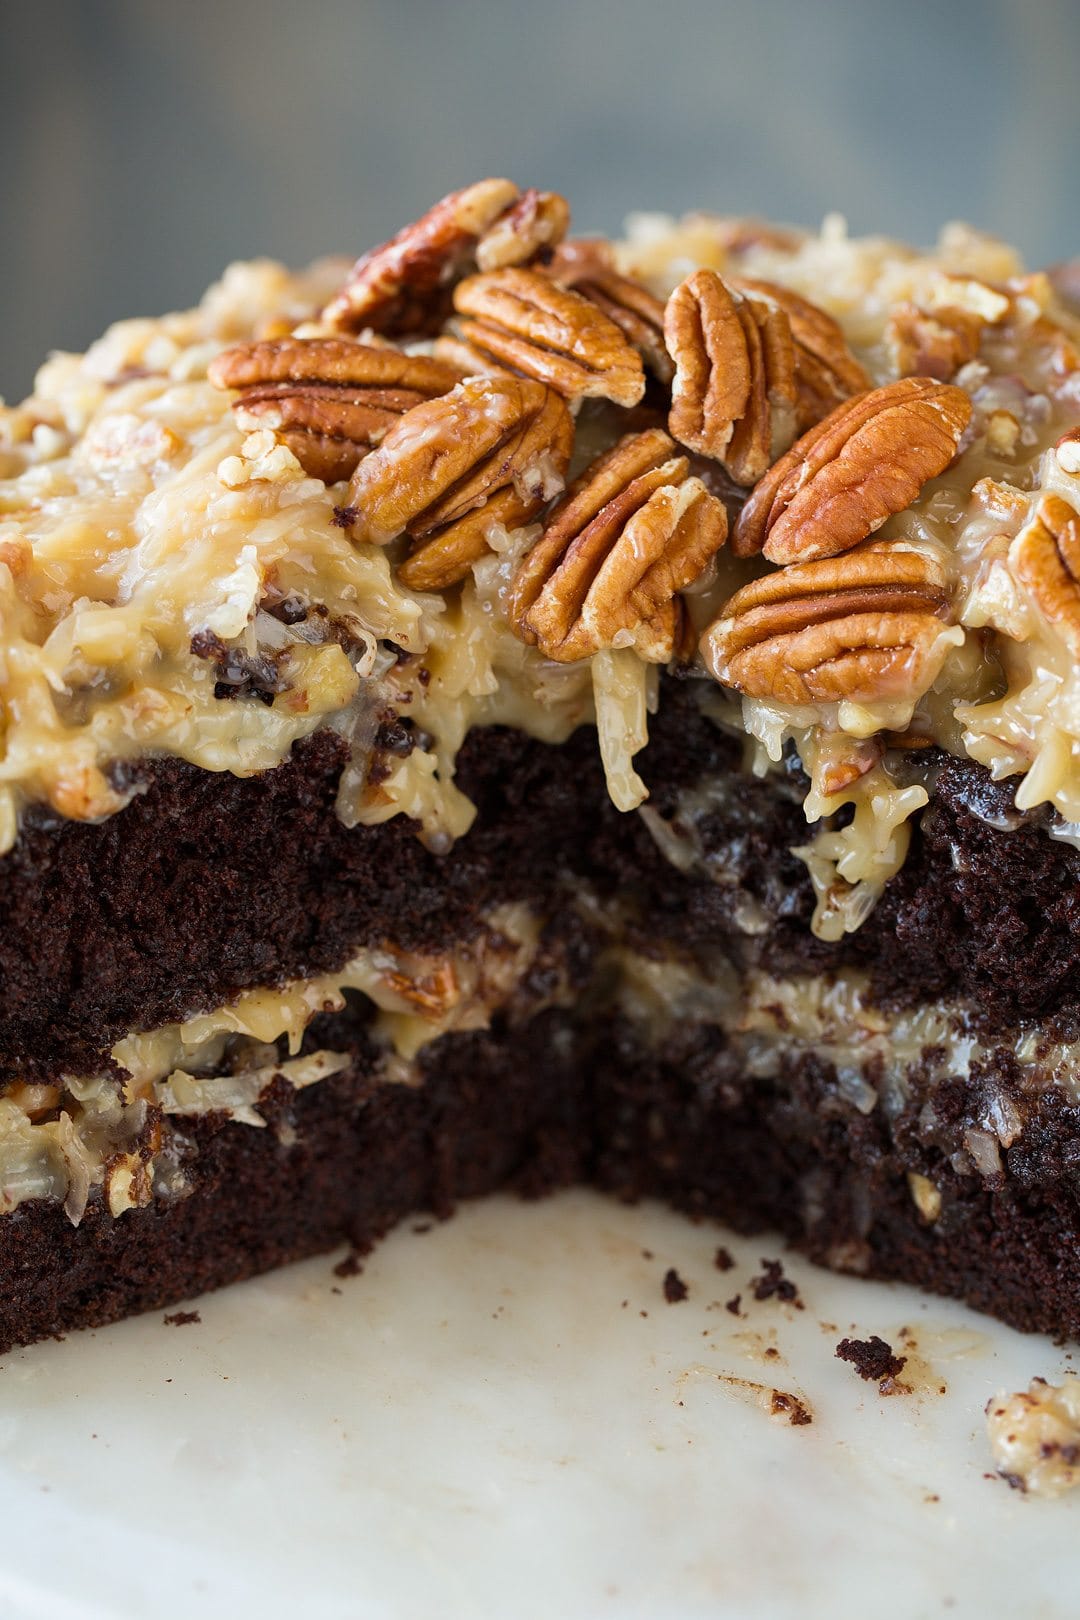 Close up image of German Chocolate Cake showing two chocolate cake layers, and two layers of german chocolate icing made from coconut and pecans.